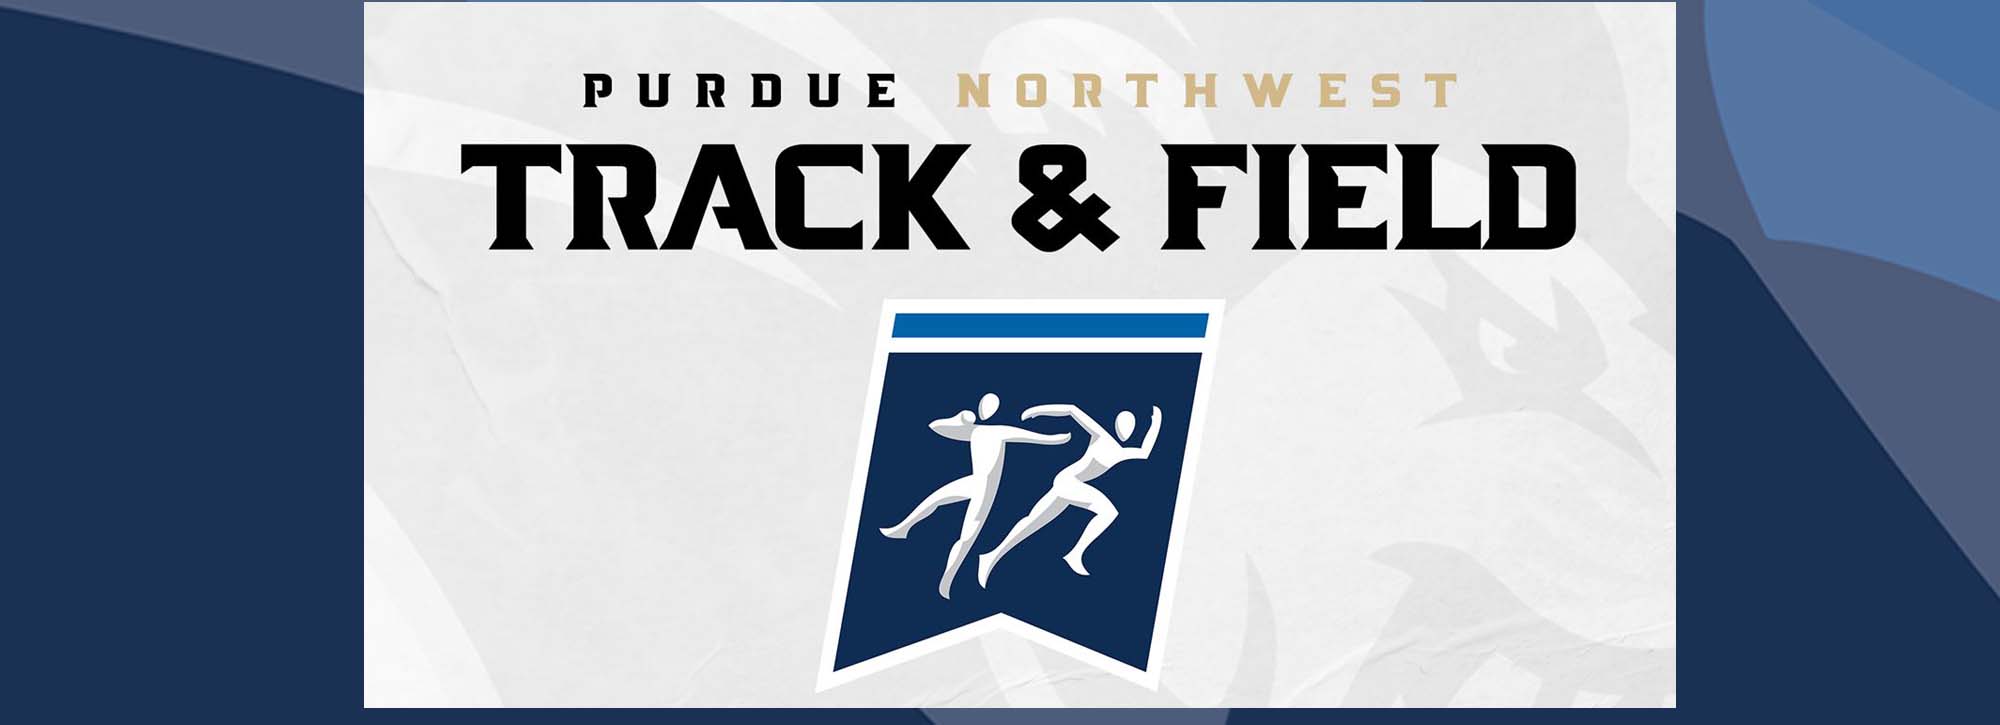 PNW adds men's and women's track and field programs